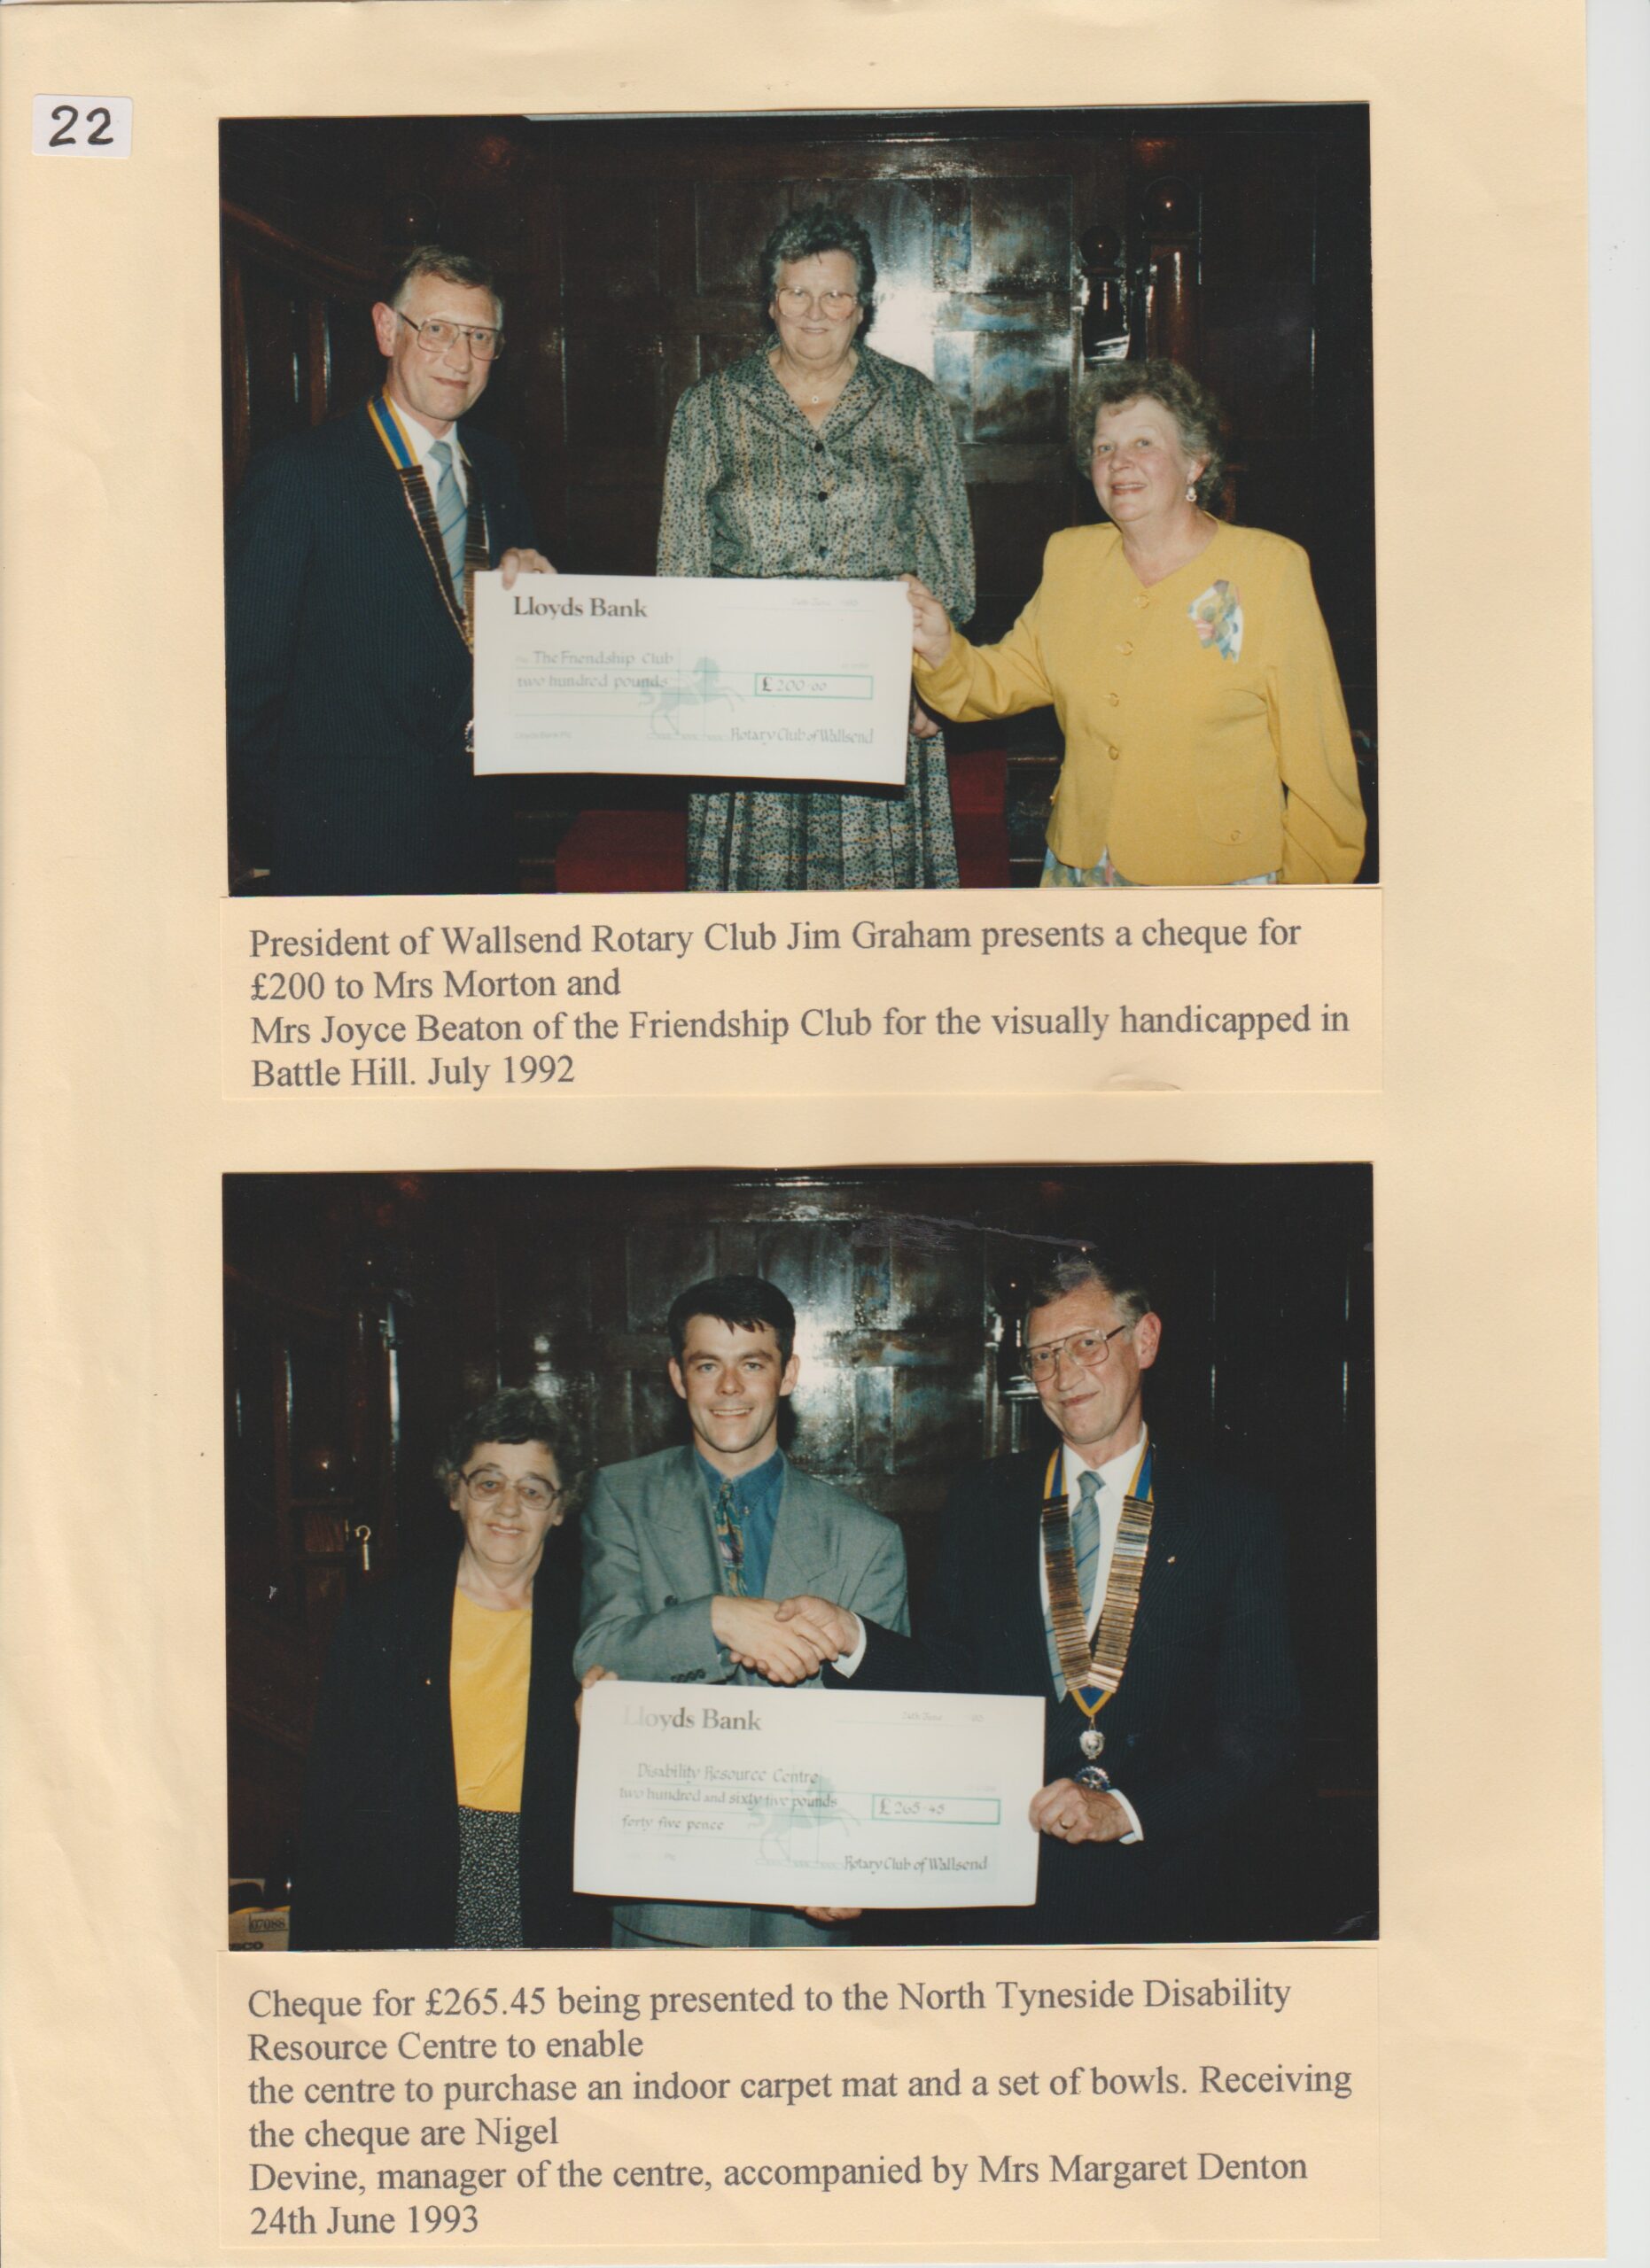 Presentation or Cheques by Wallsend rotary club 1992 _1993